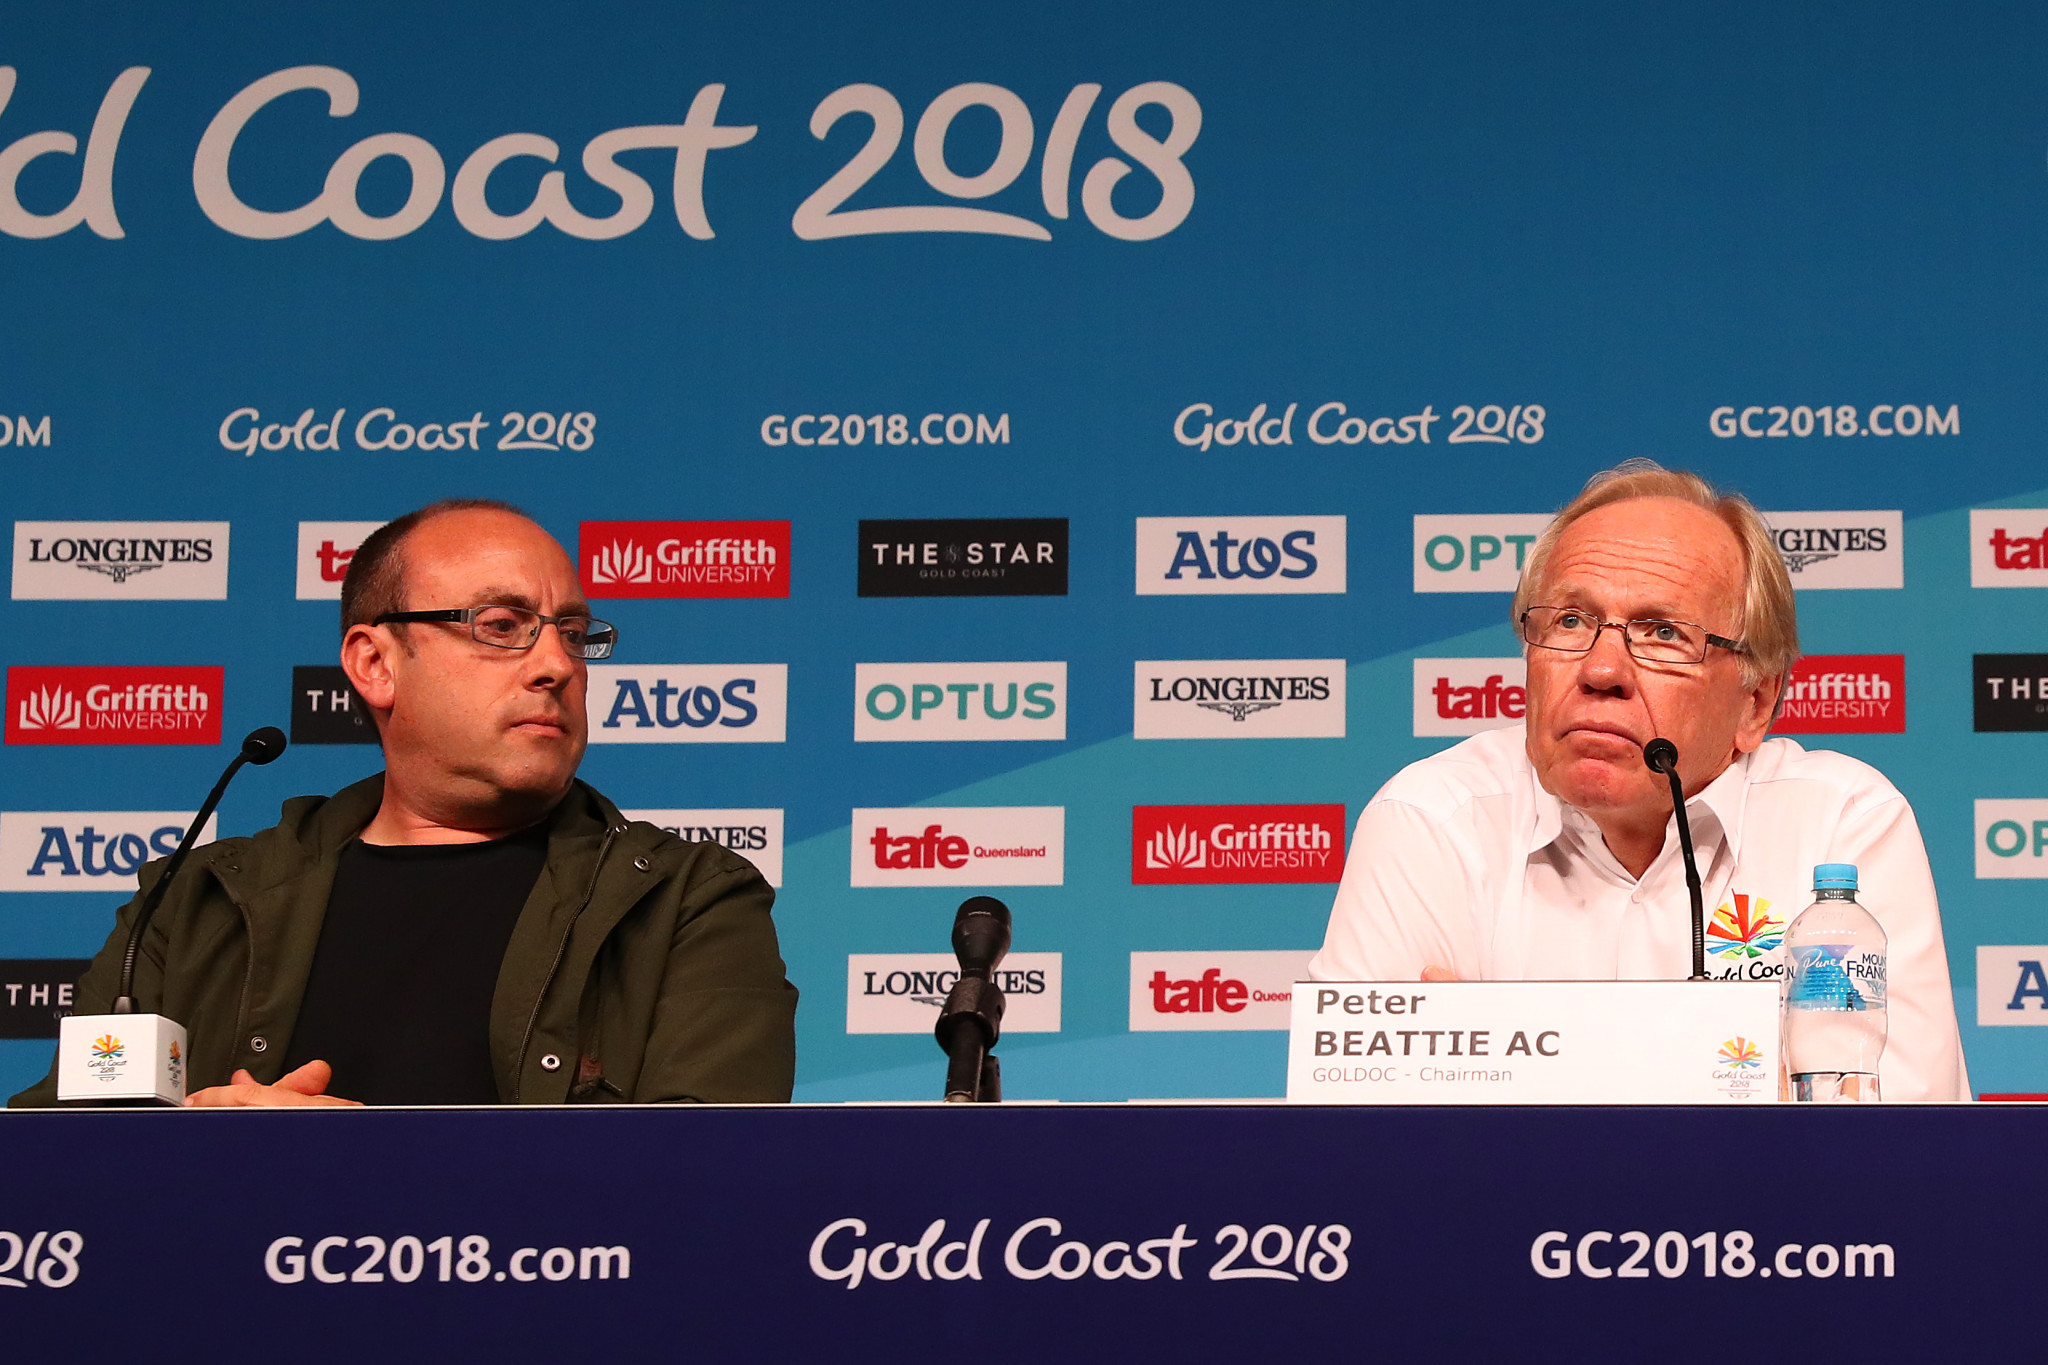 Beattie admits that Gold Coast 2018 Closing Ceremony will always be "damaging" to his reputation